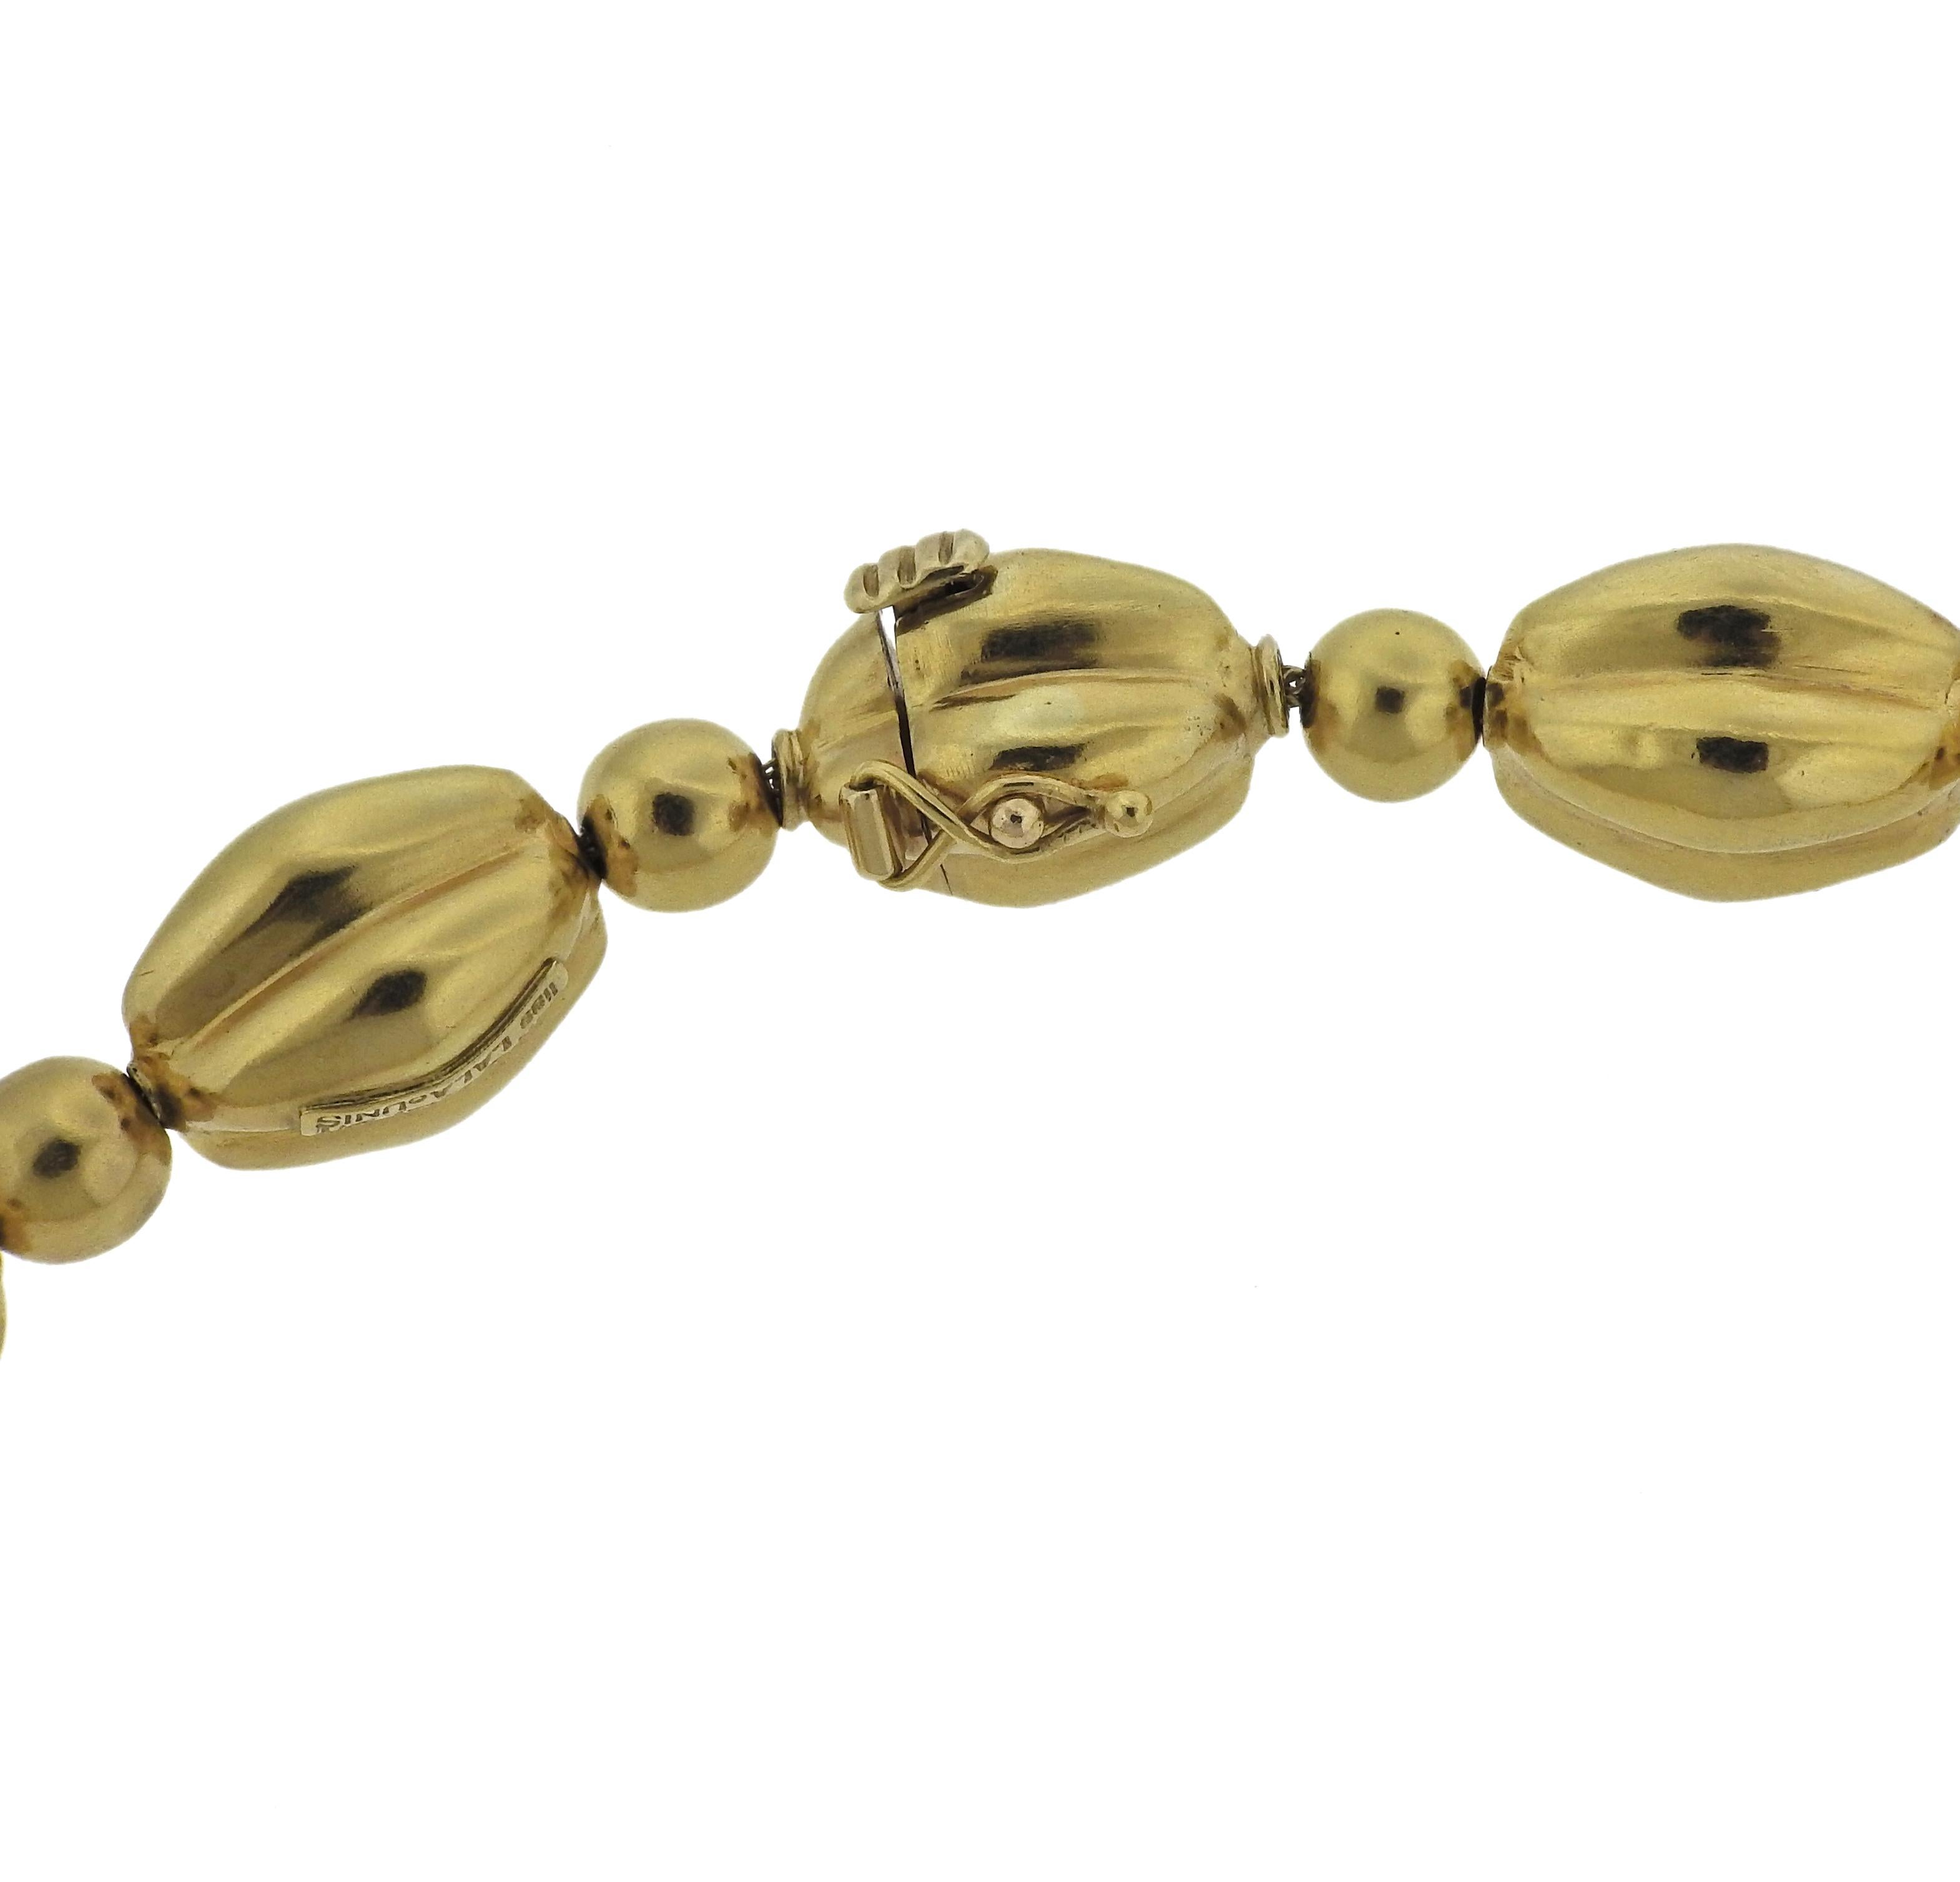 22k yellow gold necklace by Greek designer Ilias Lalaounis, featuring detachable portion to wear at different lengths. Necklace is 24.5